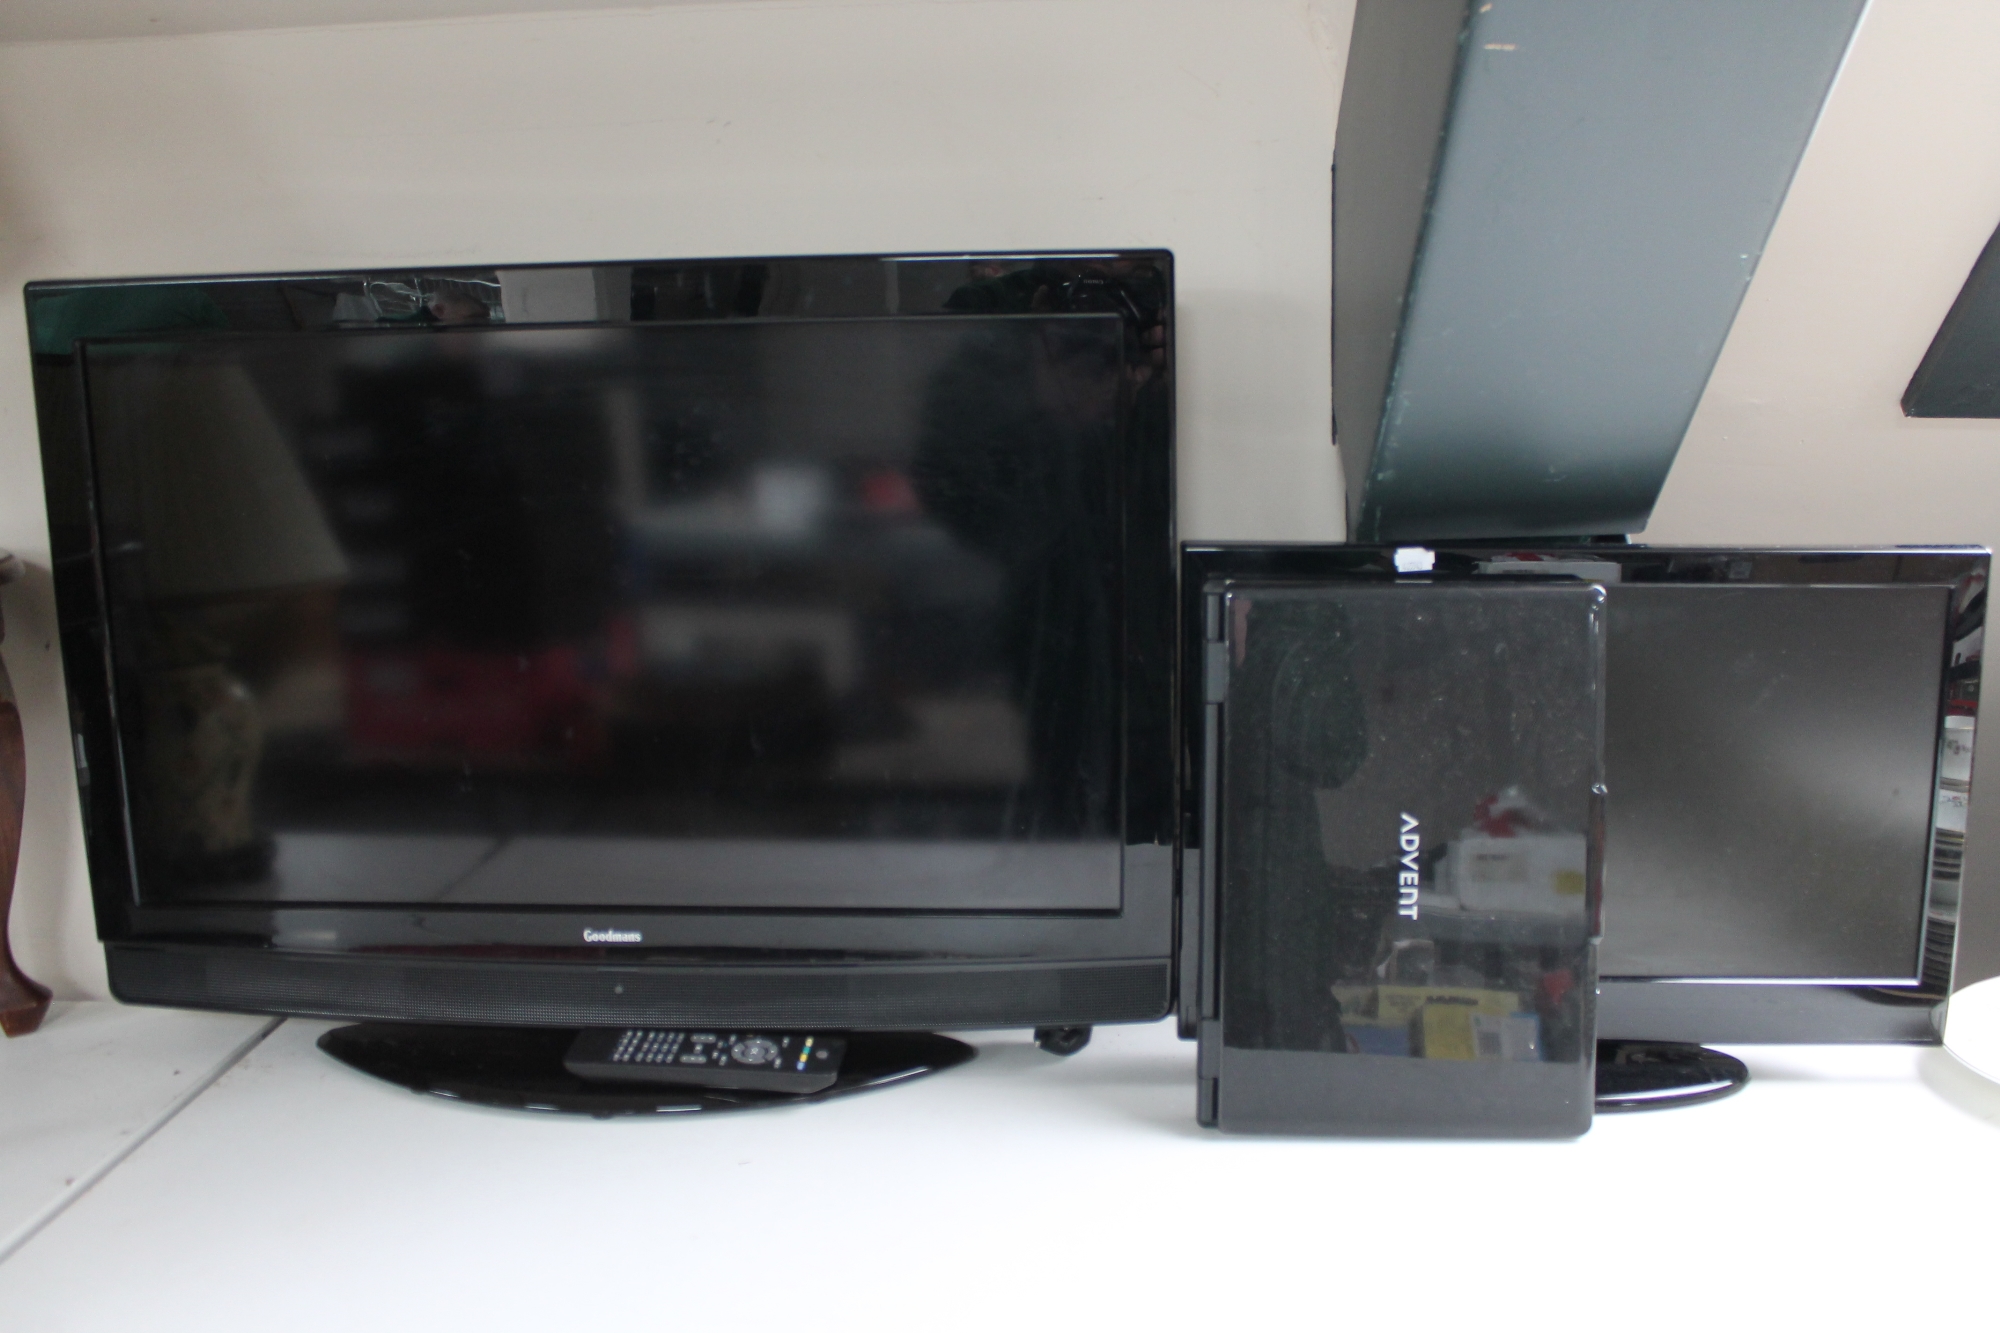 A Goodmans 32 inch LCD TV and a Linsar 22 inch LCD TV with remote plus a Advent lap top with